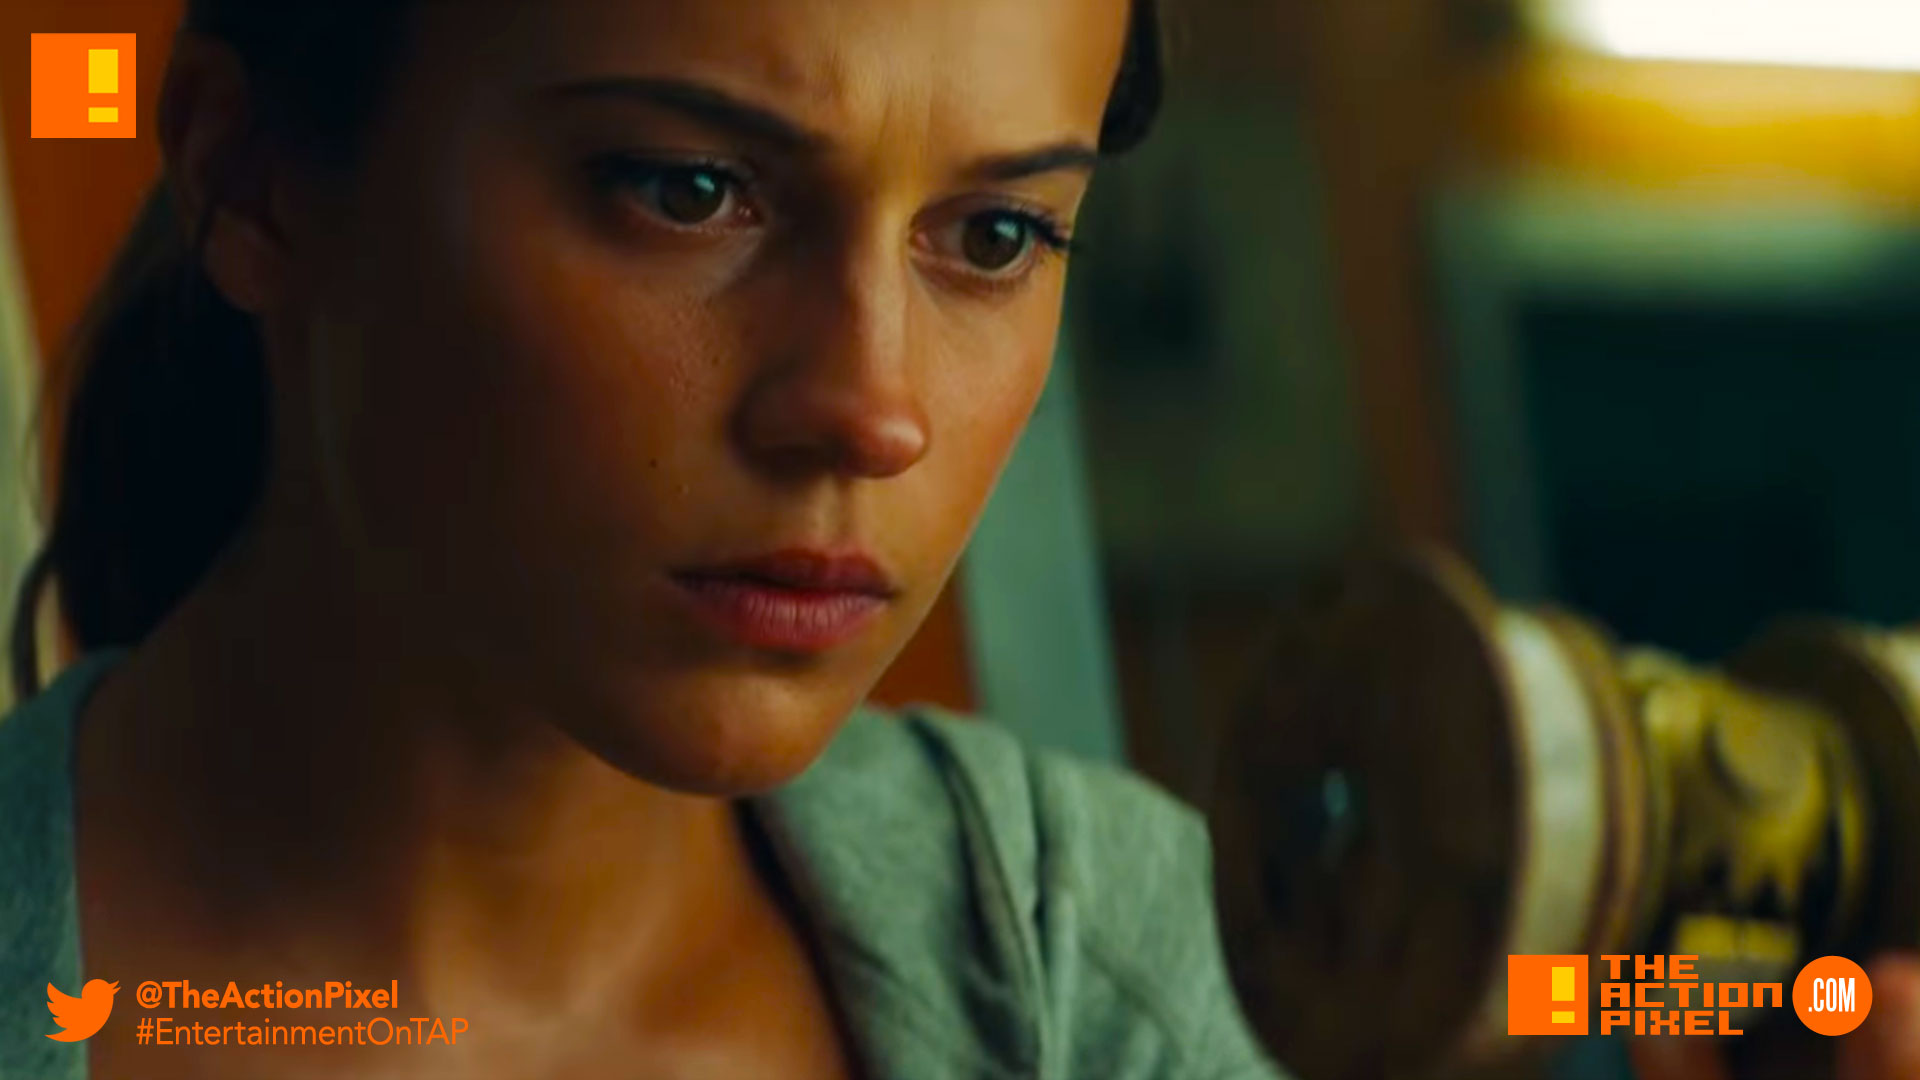 tomb raider, trailer 2, the action pixel, alicia vikander, bts, trailer, TOMB RAIDER, ALICIA vikander, lara croft, first look, entertainment on tap, the action pixel,